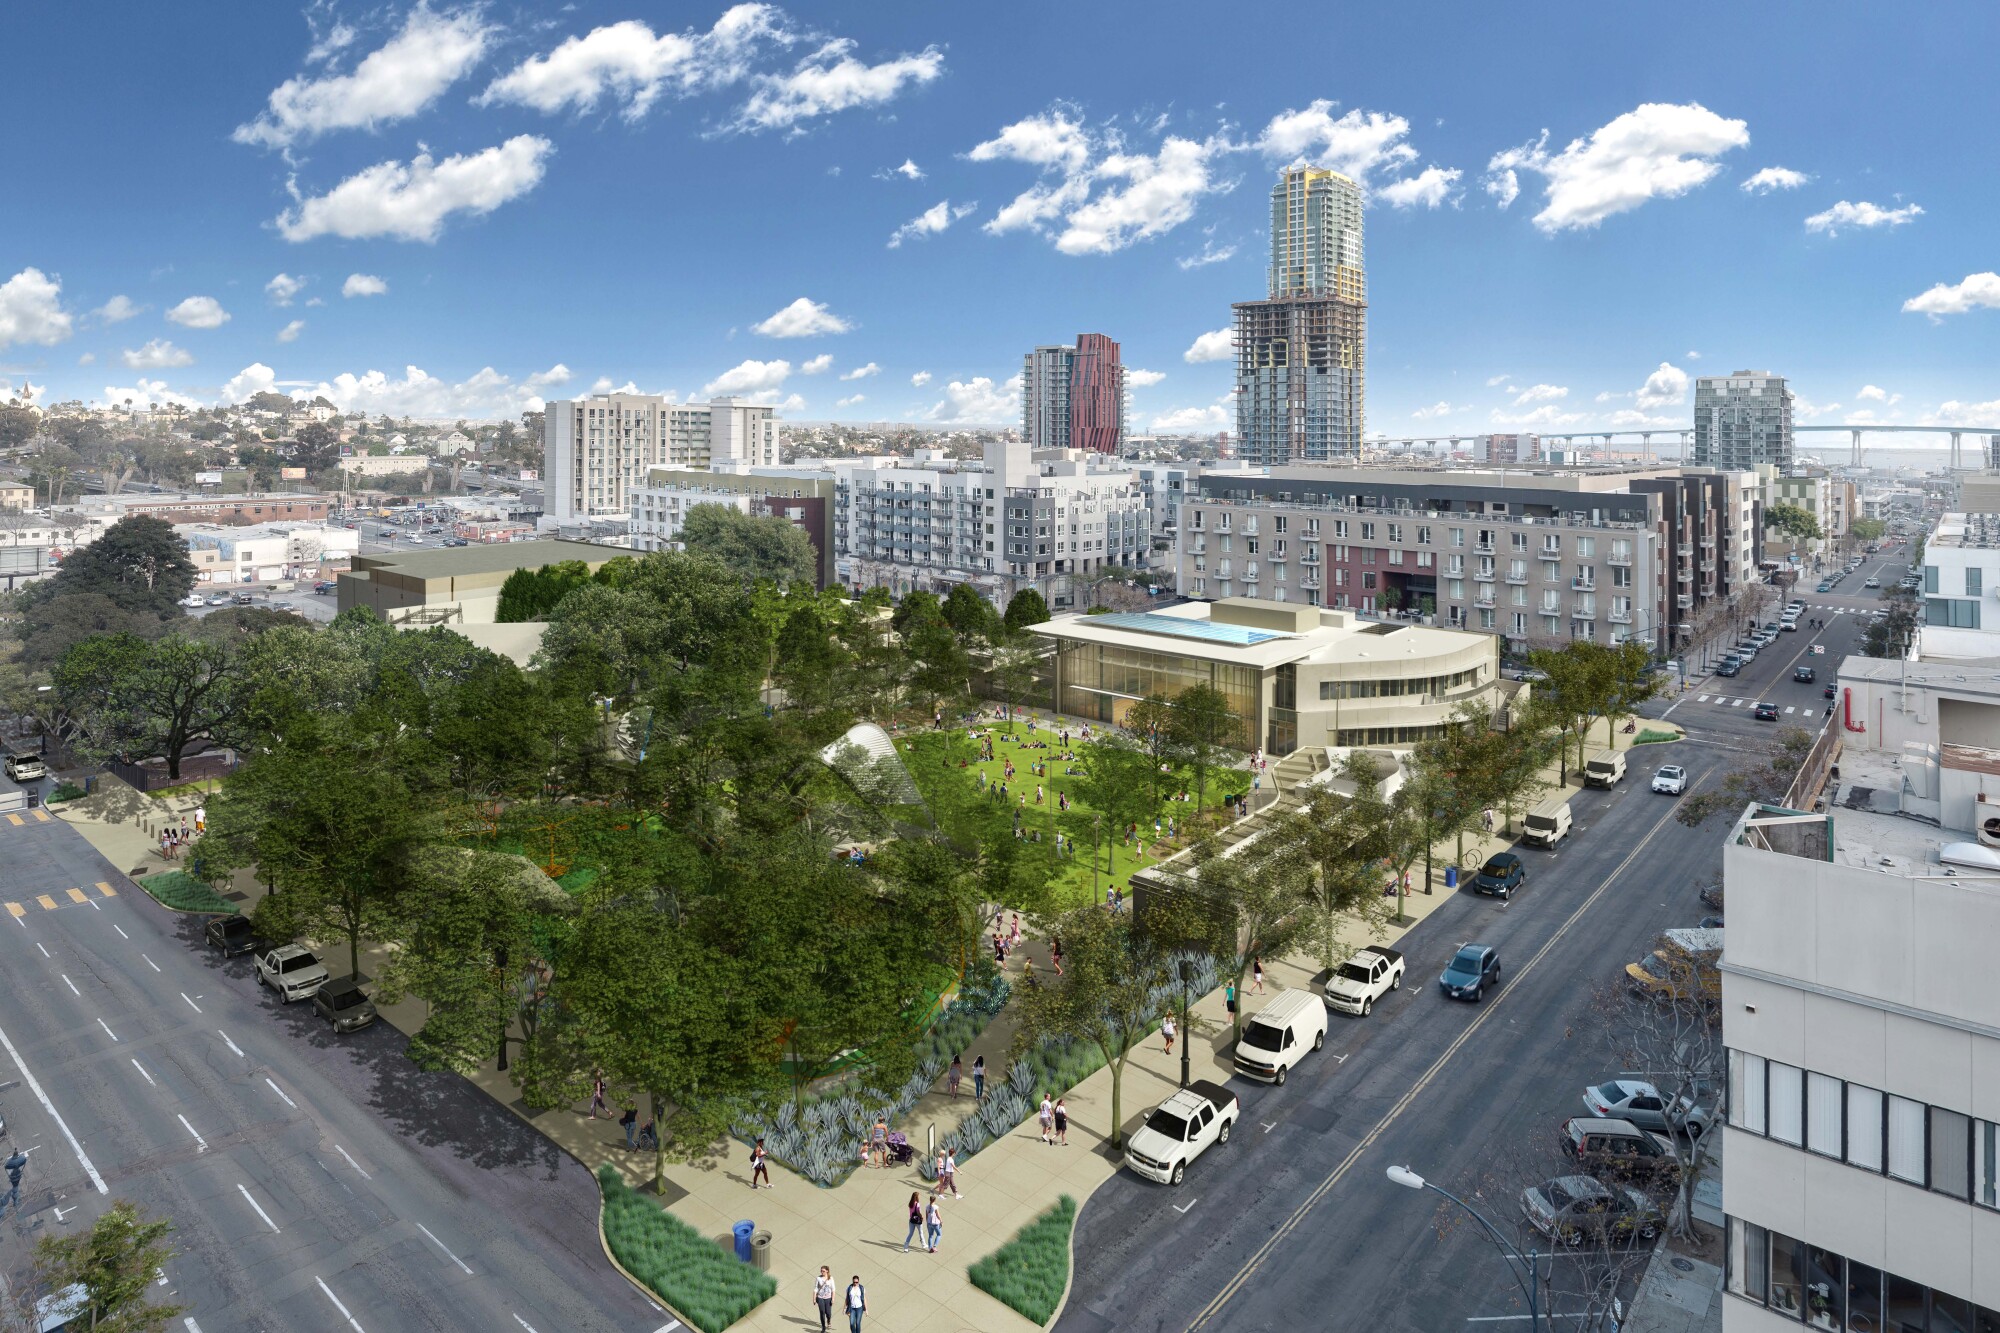 Artist rendering of the four-acre East Village Green, as seen from the corner of 13th and F streets.